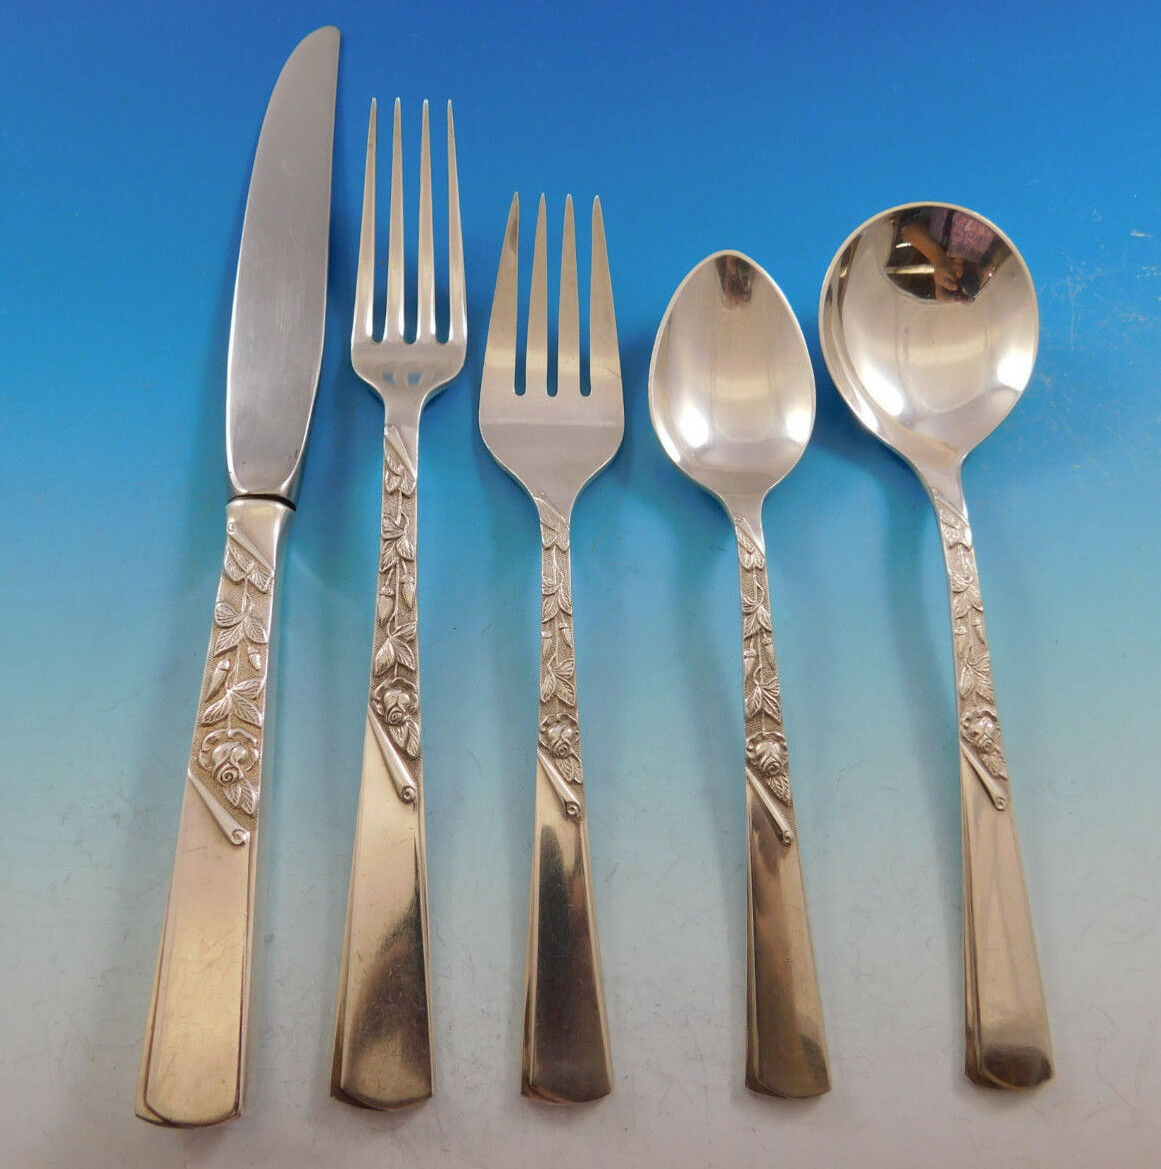 Primary image for Rose Motif by Stieff Sterling Silver Flatware Set for 8 Service 45 pieces